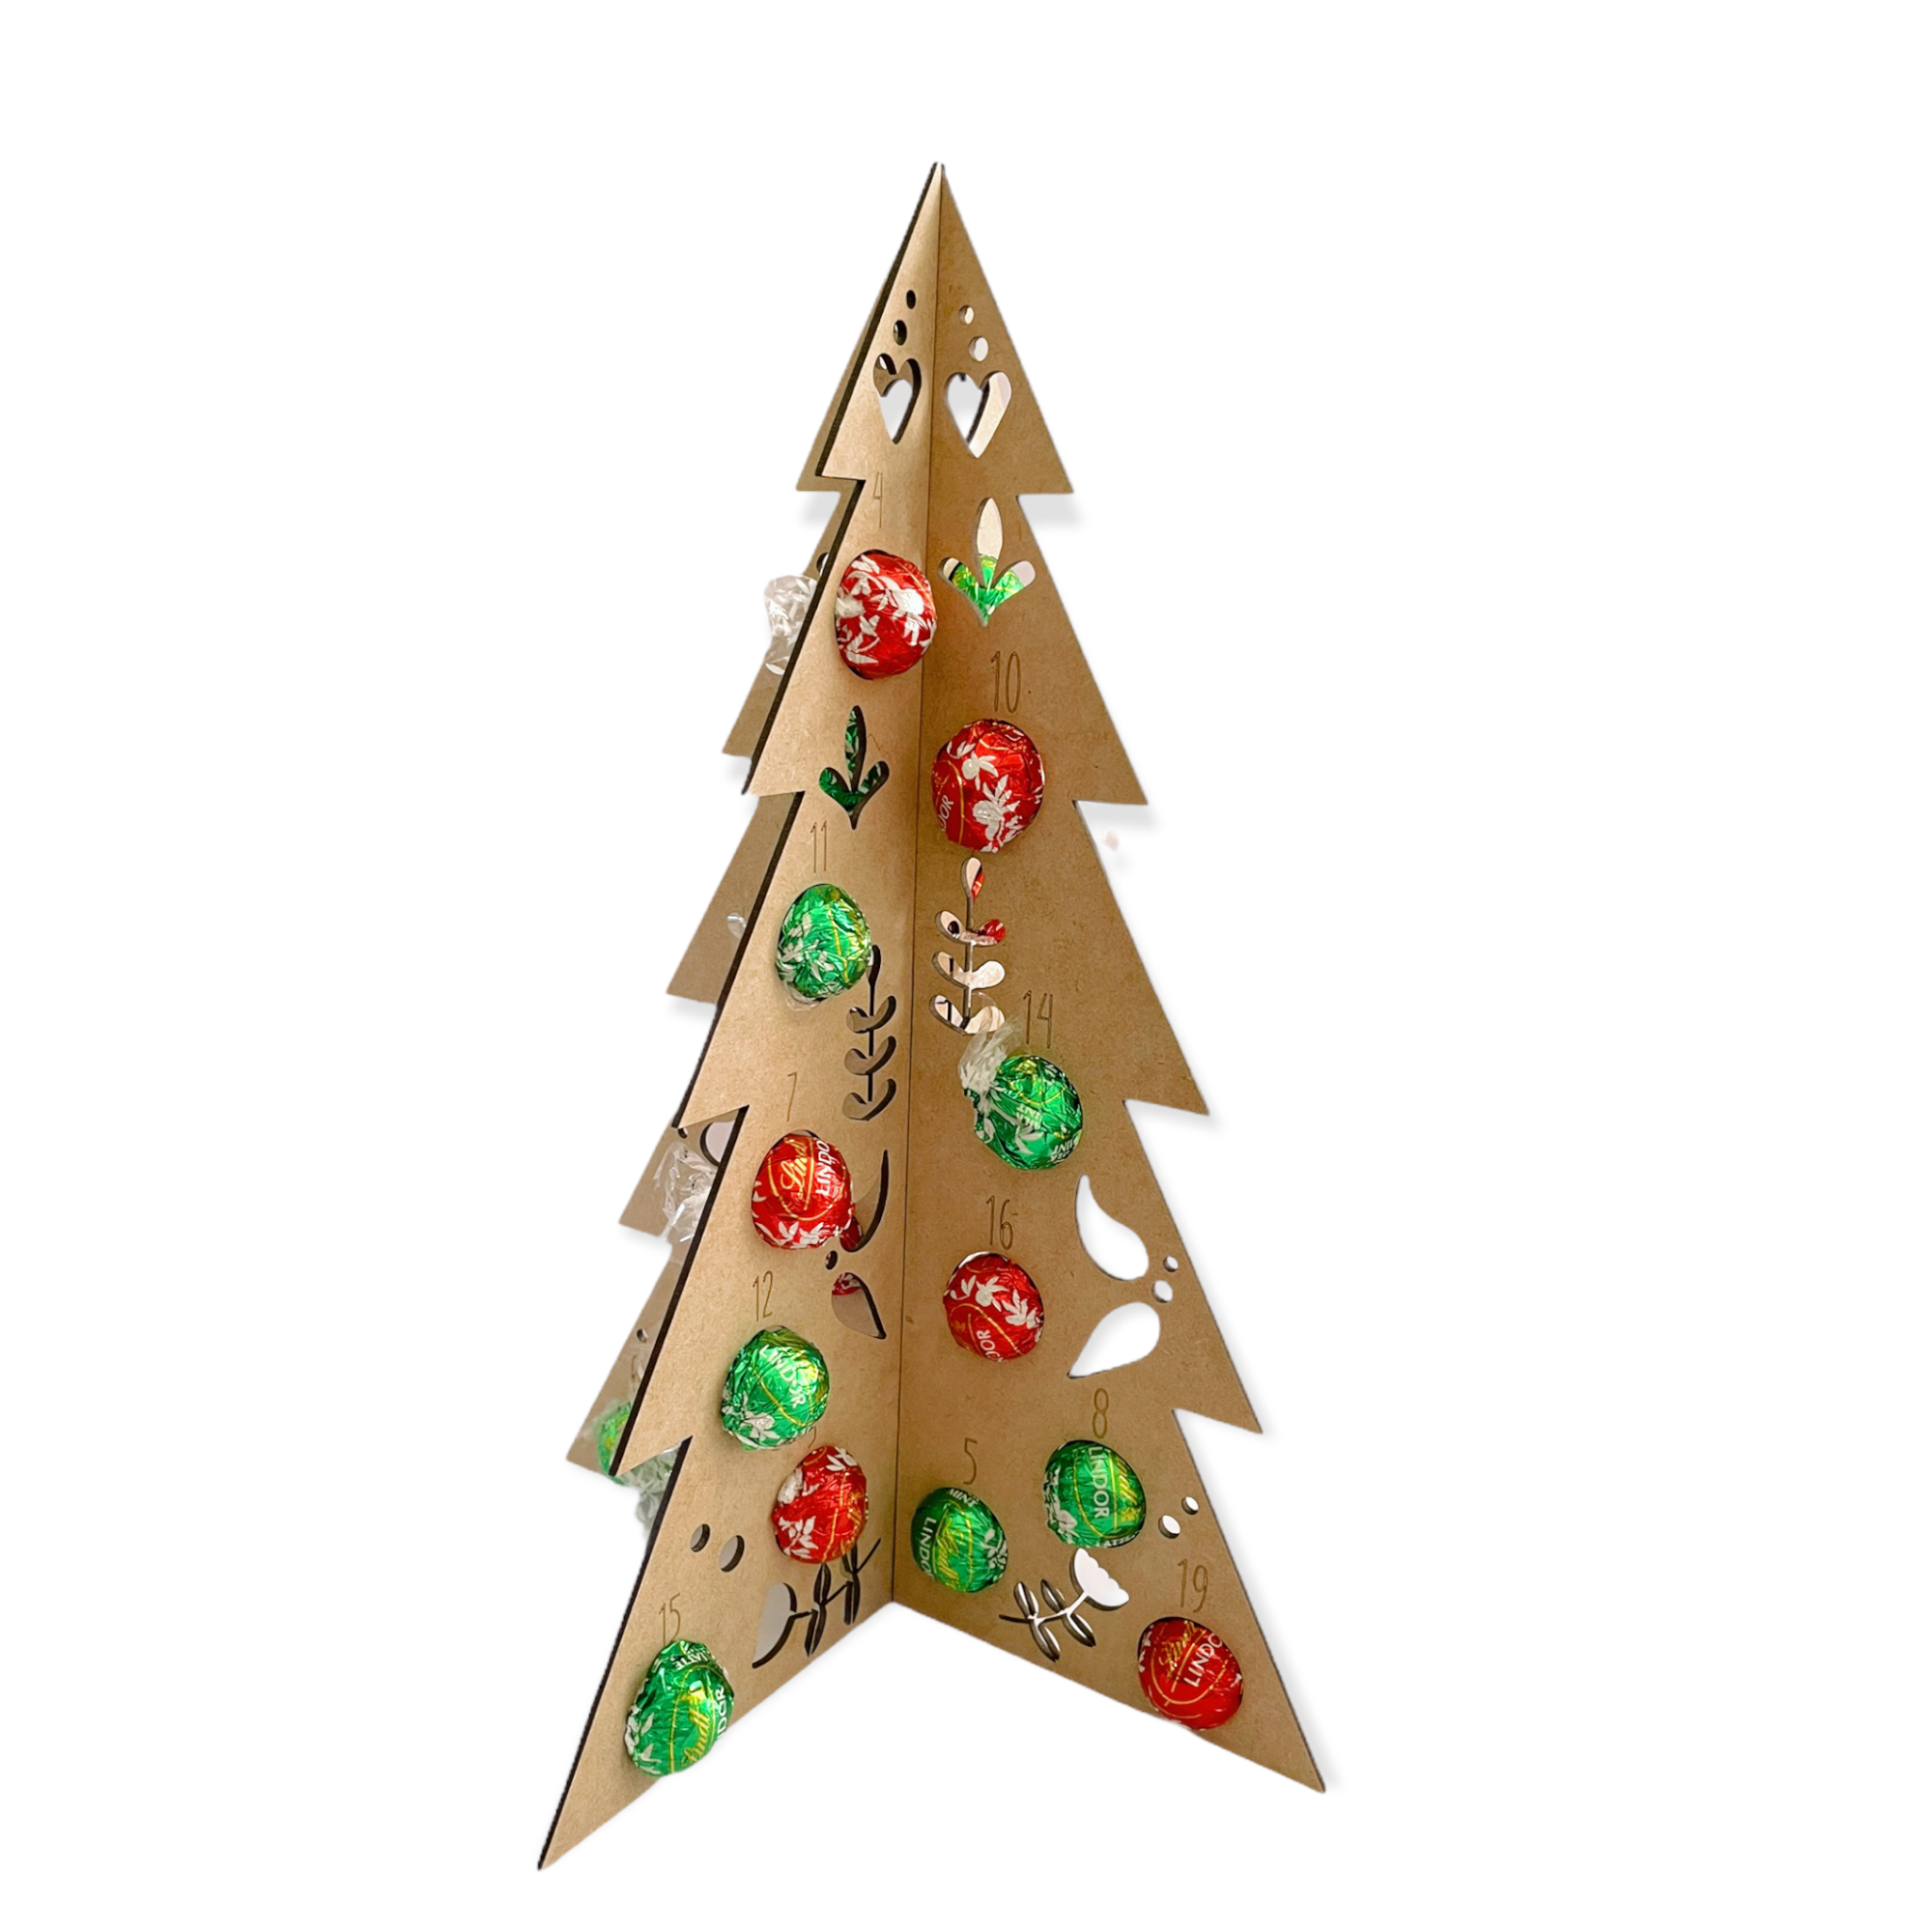 Lindt　the　Delicious　to　Most　Ink　and　Way　Nectar　to　Countdown　Chocolate　Christmas　Nectar　Ink　Advent　Introducing　Tree　–